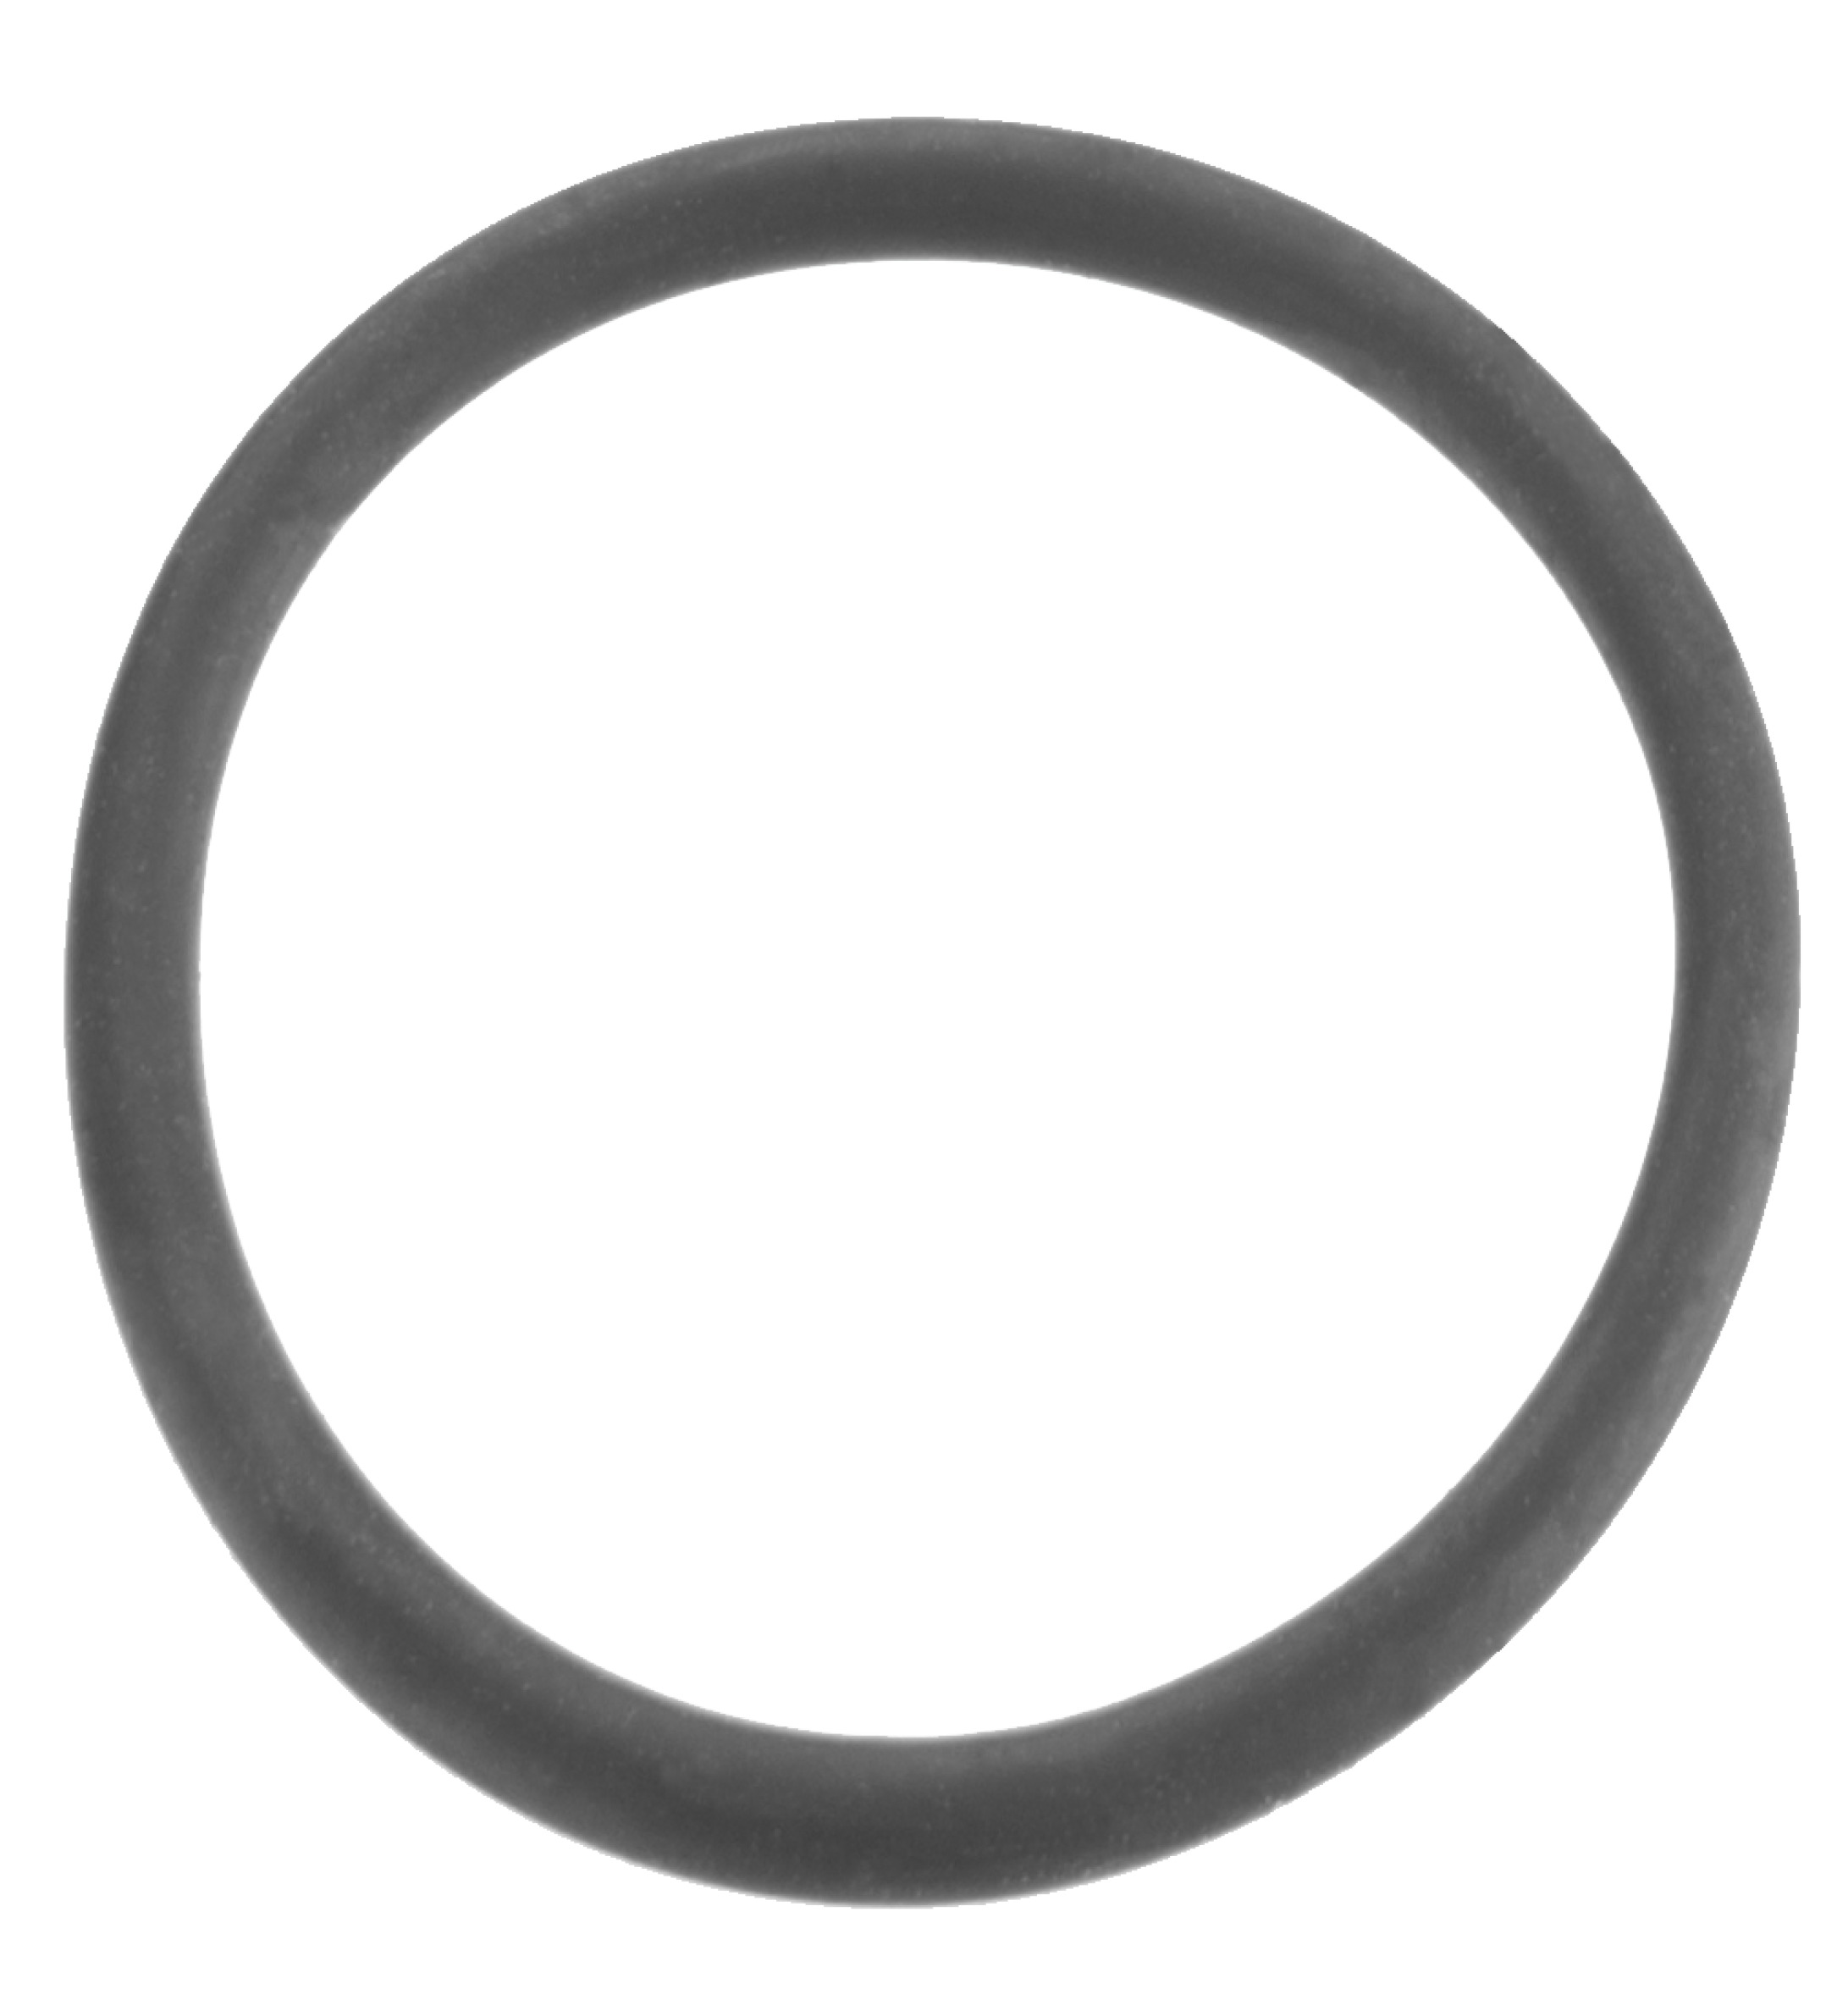   O-RING F.WT-EXCENTERSTOPF. 32X3(1)